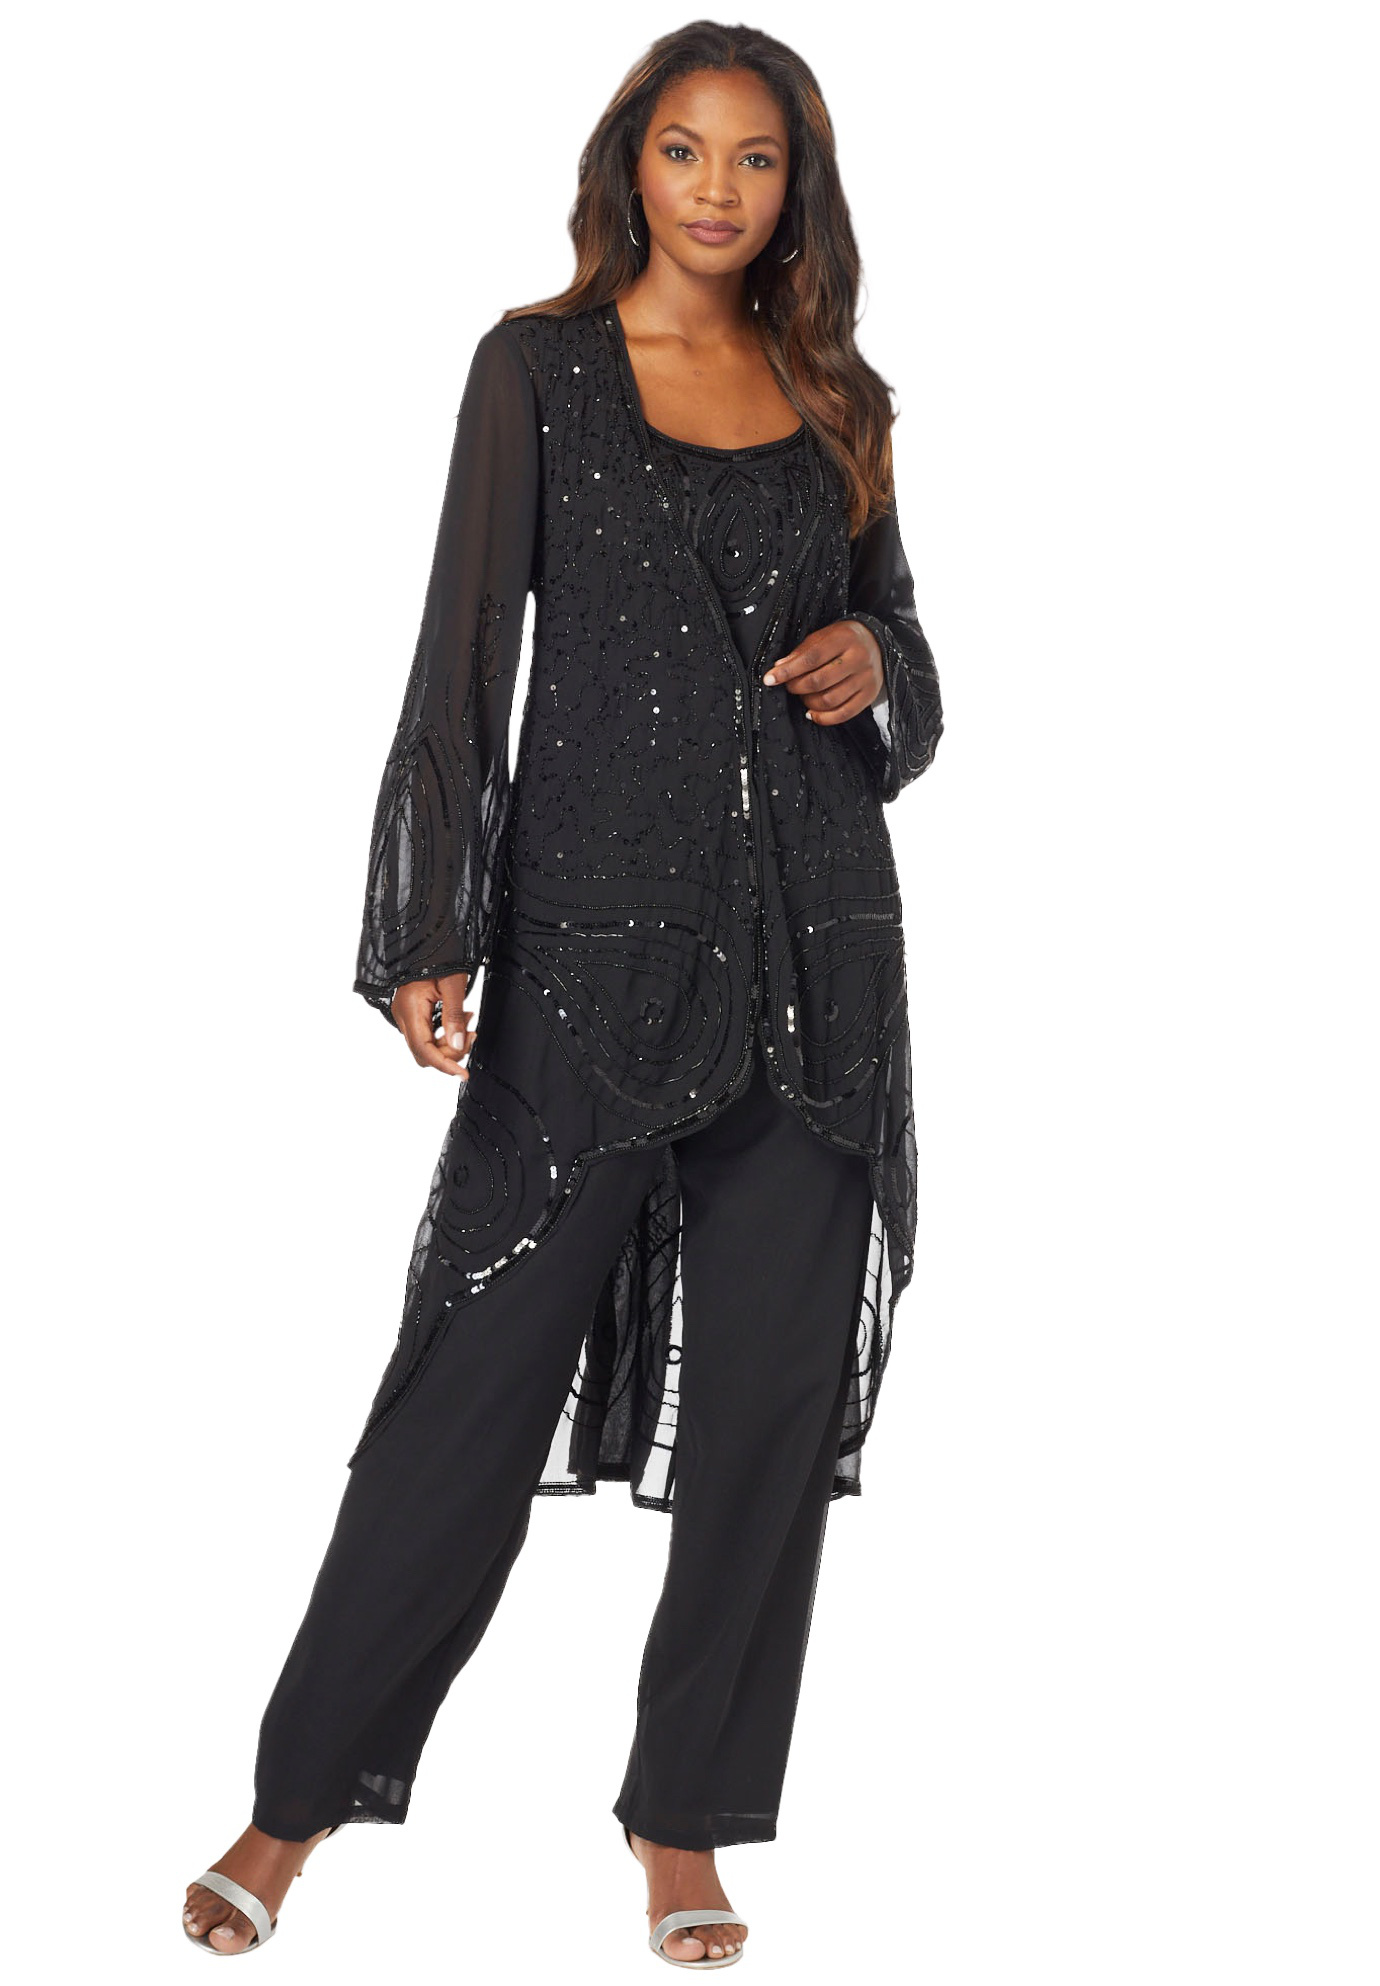 Roaman's Women's Plus Size Three-Piece Beaded Pant Suit Formal Evening Wear Set, Mother Of The Bride Outfit - image 1 of 6